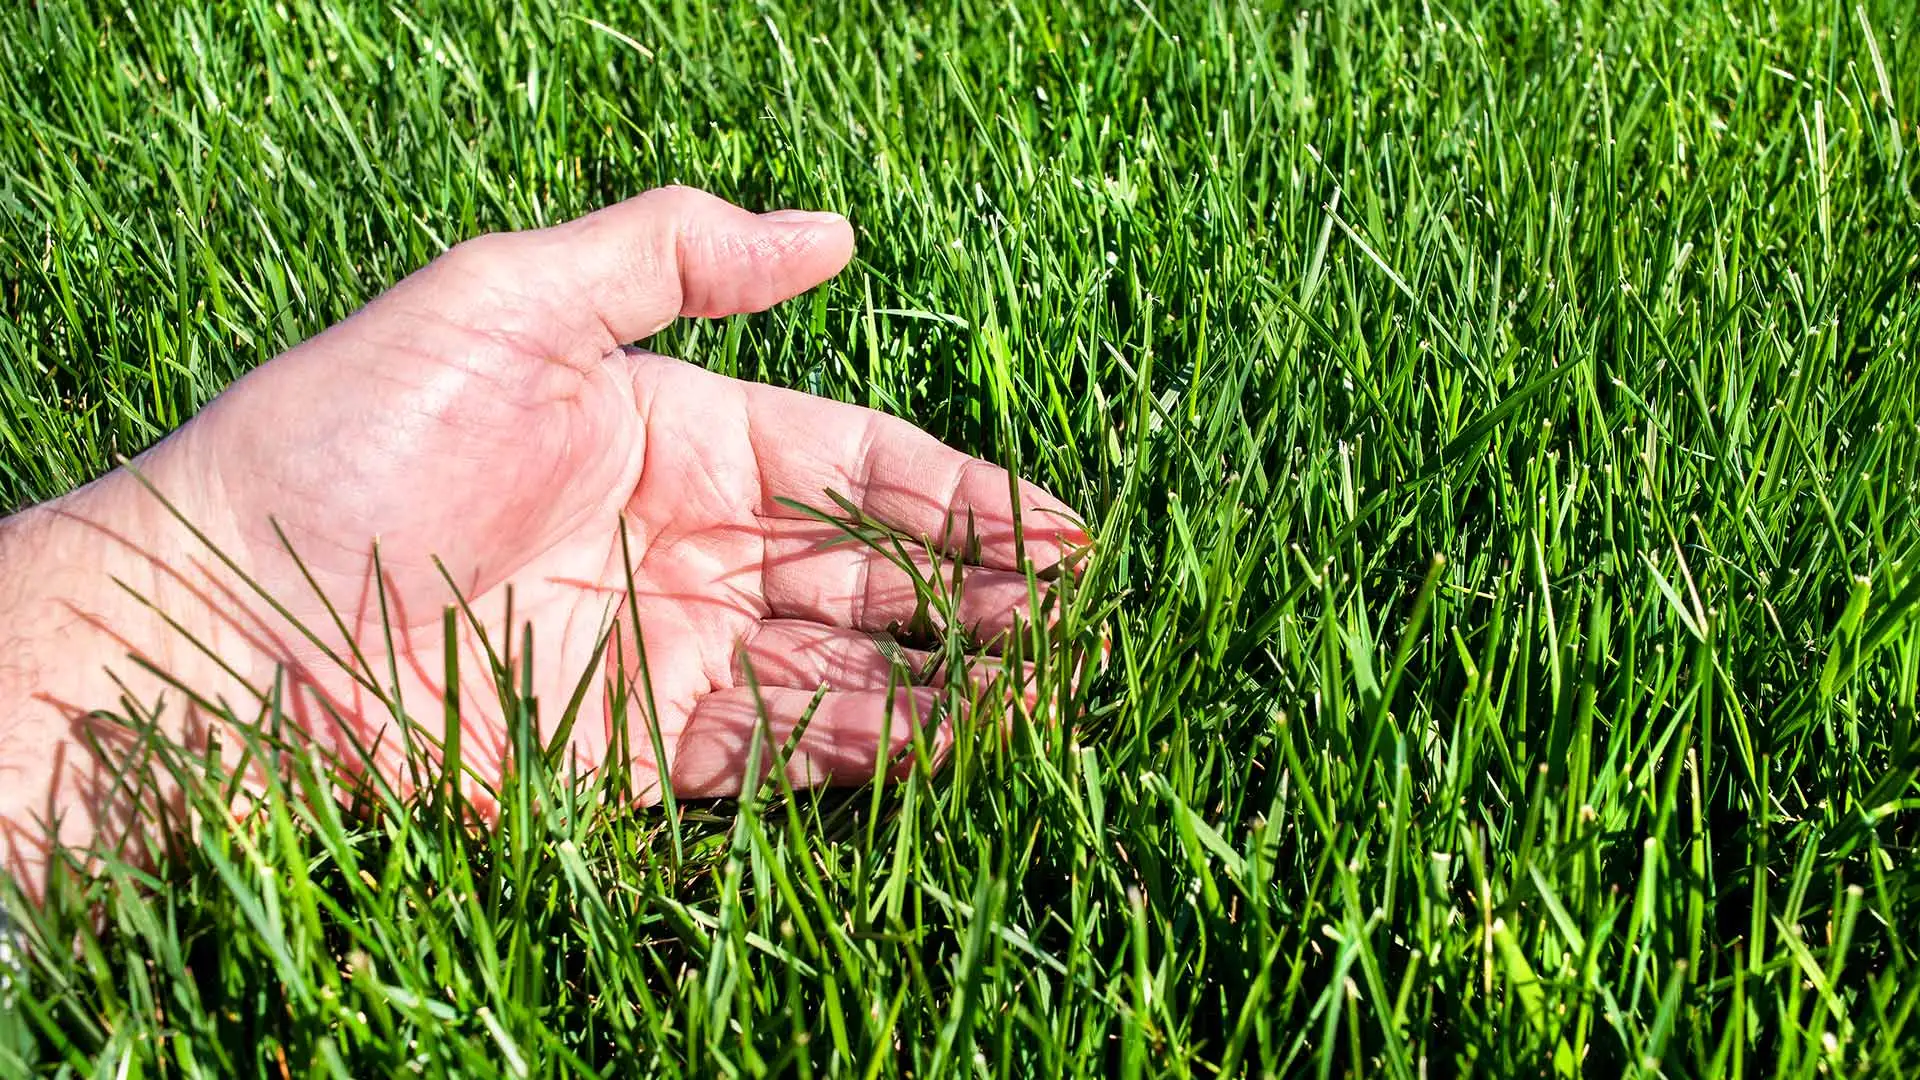 Hand in deep lawn grass near Fishers, Indiana.